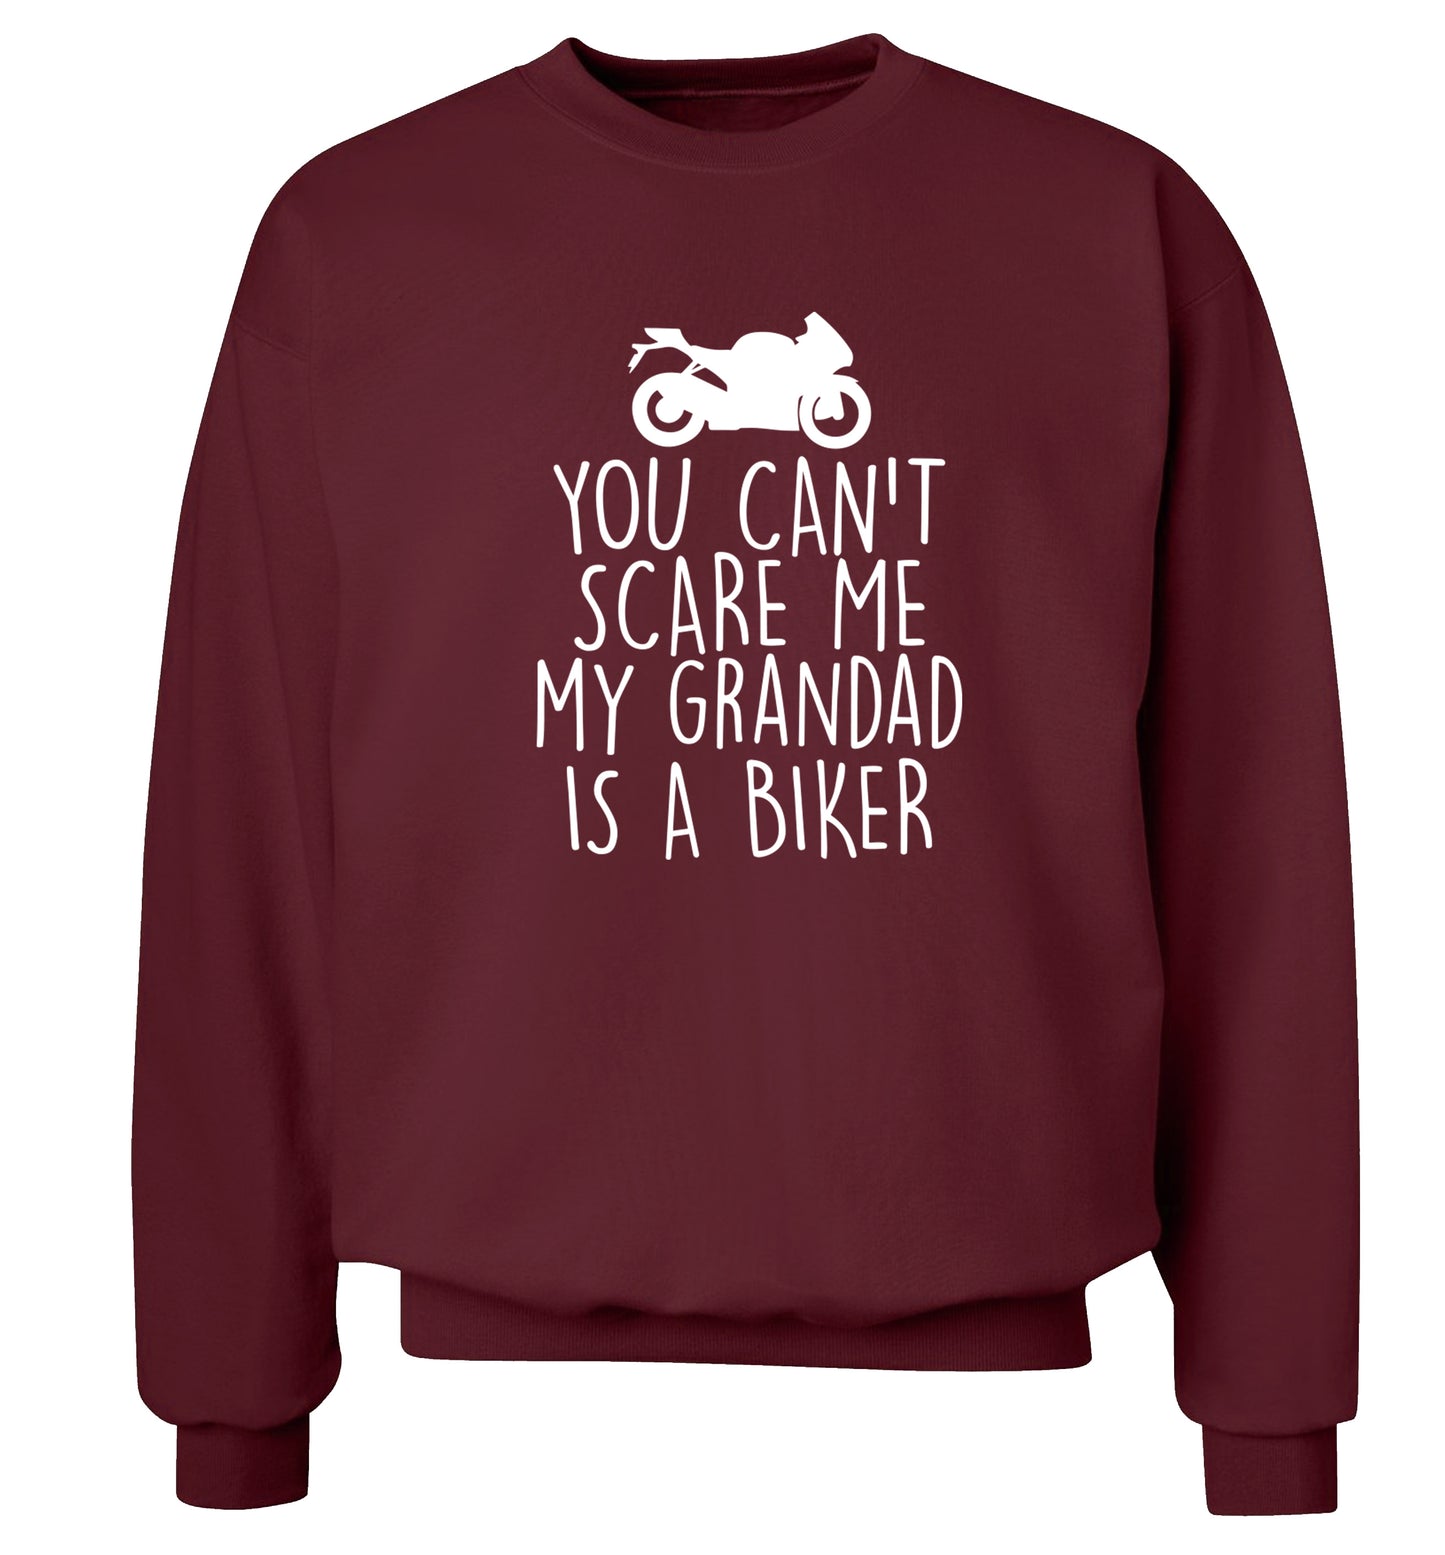 You can't scare me my grandad is a biker Adult's unisex maroon Sweater 2XL